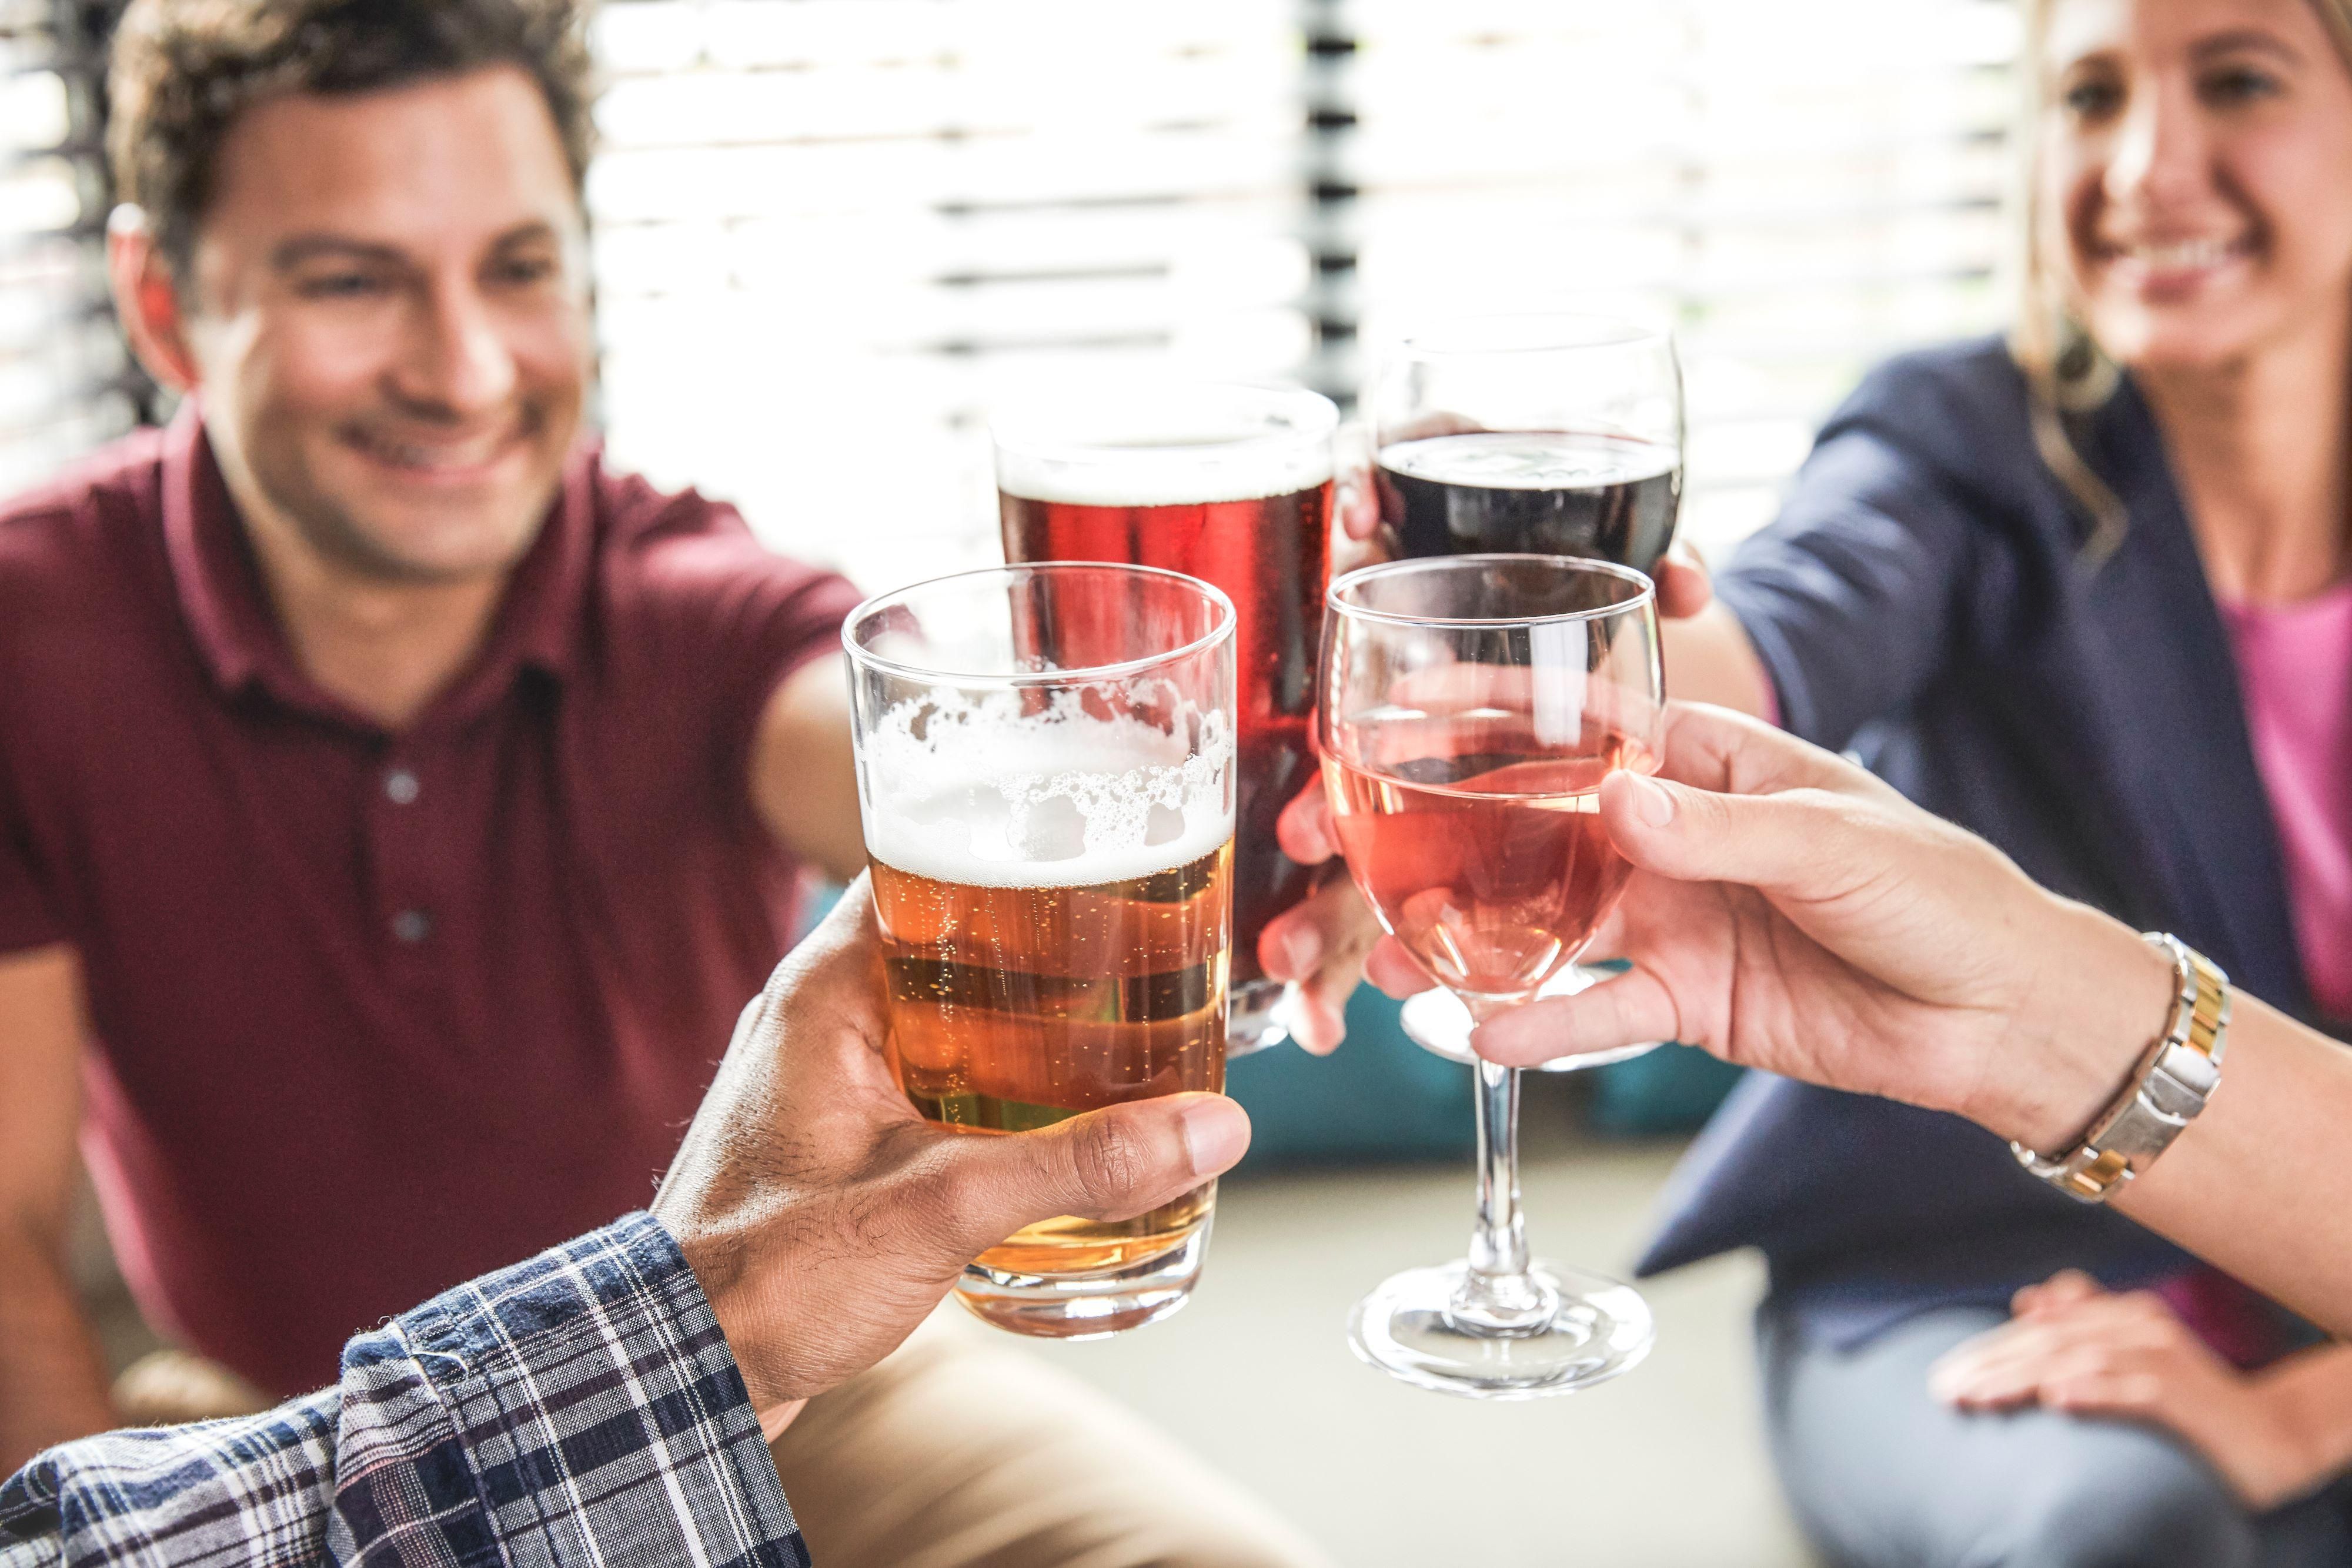 Join us Monday through Wednesday for The Evening Social featuring delicious bites, local beer, wines and non alcoholic beverages.  Effective January 1, 2022, the evening social will be available from 5:30PM - 7:00PM.